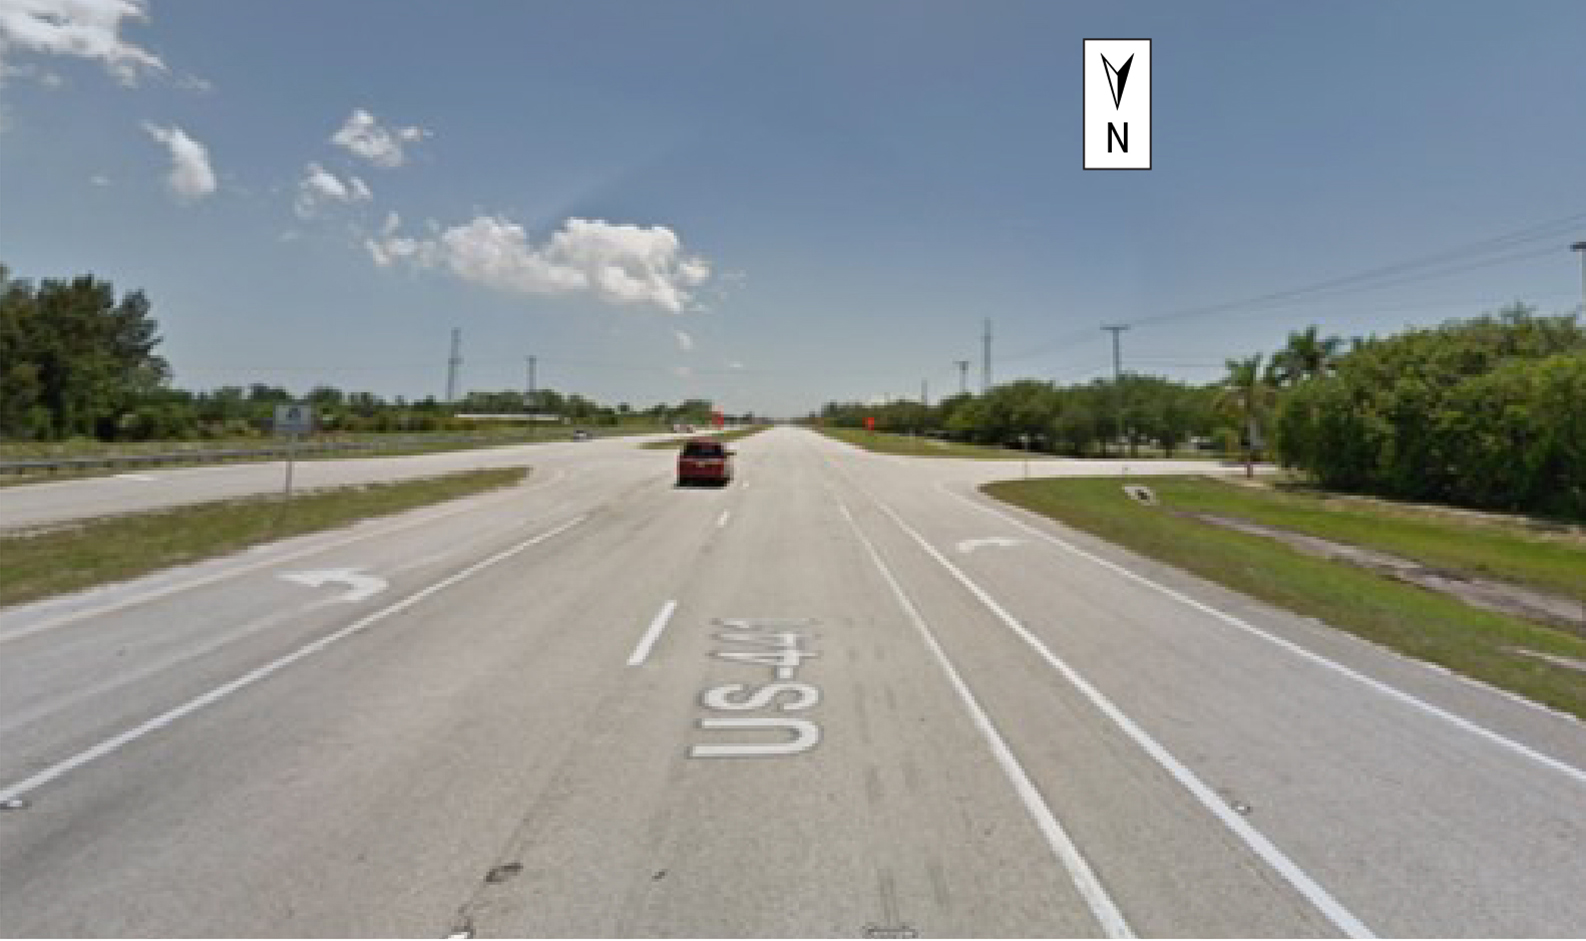 Southbound view of crash intersection. Private driveway into agricultural facility is visible on right side of image.